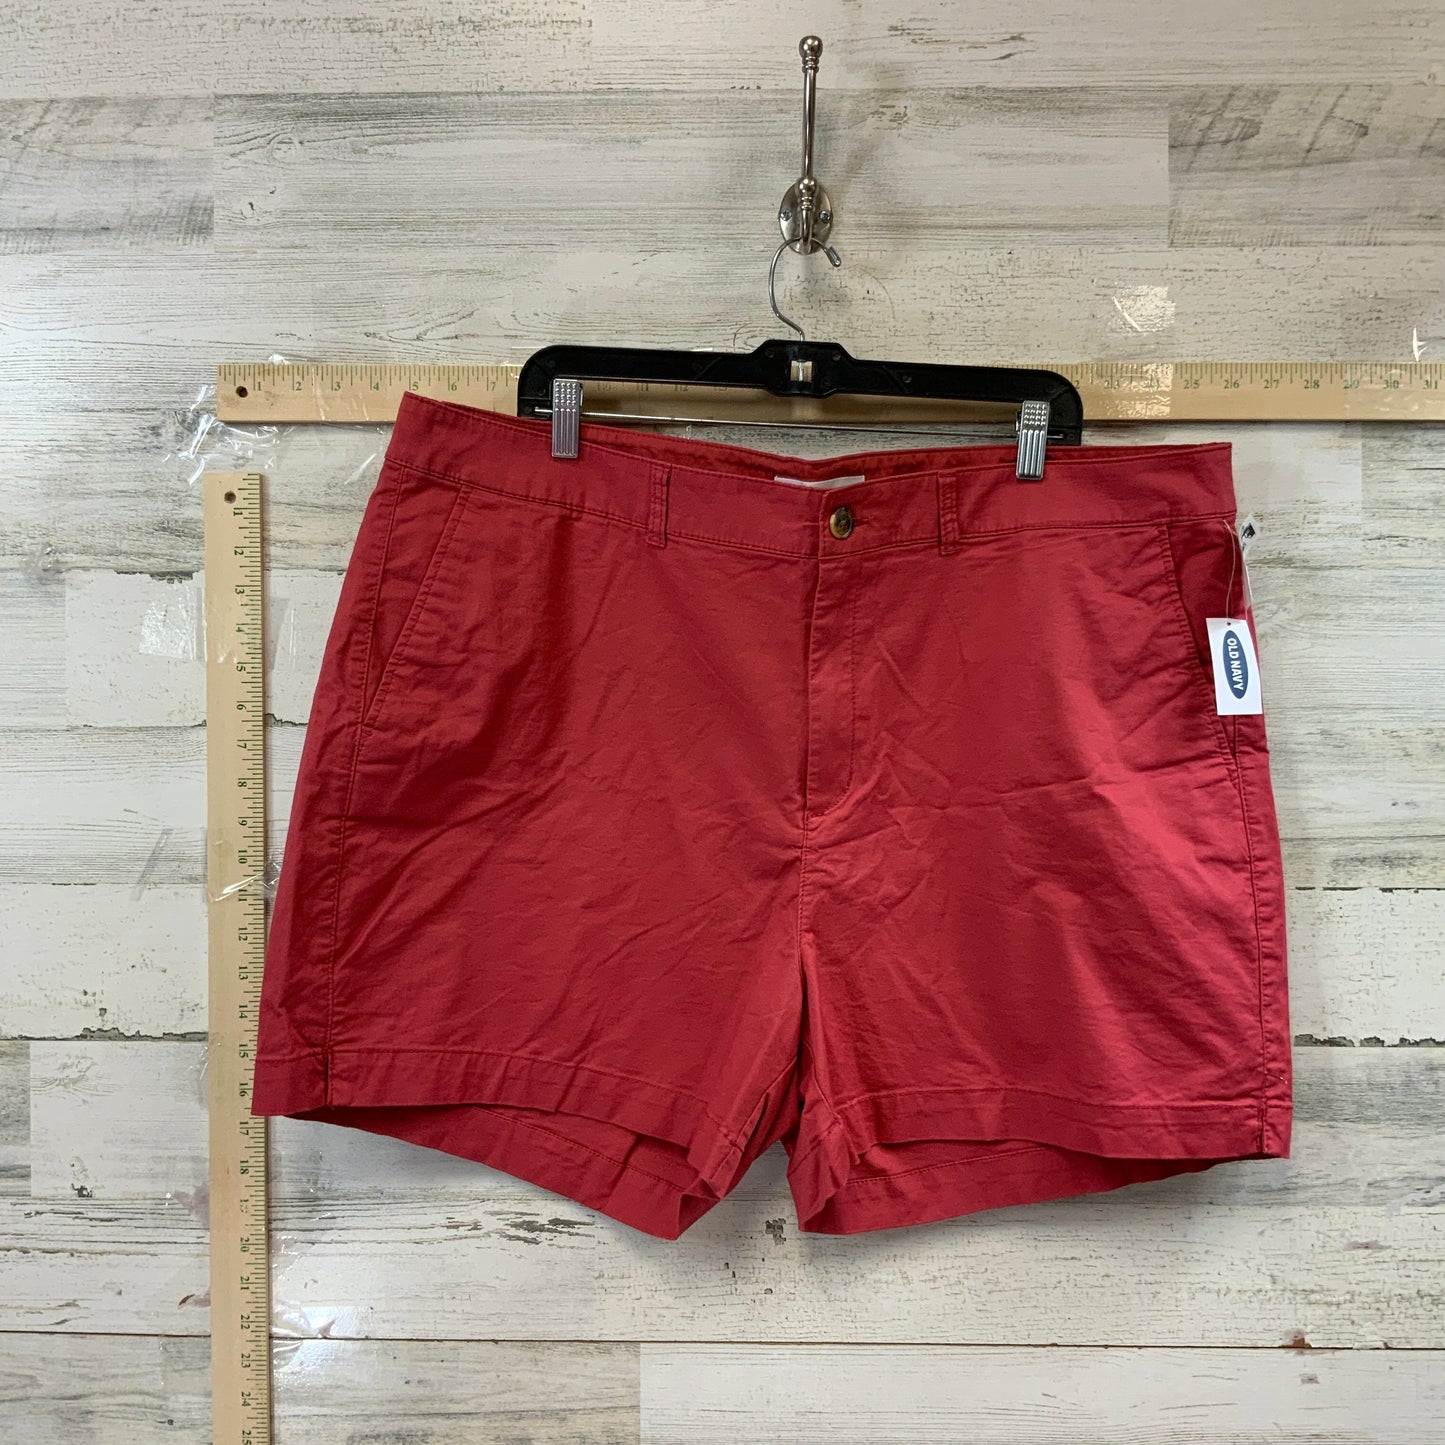 Red Shorts Old Navy, Size 20w